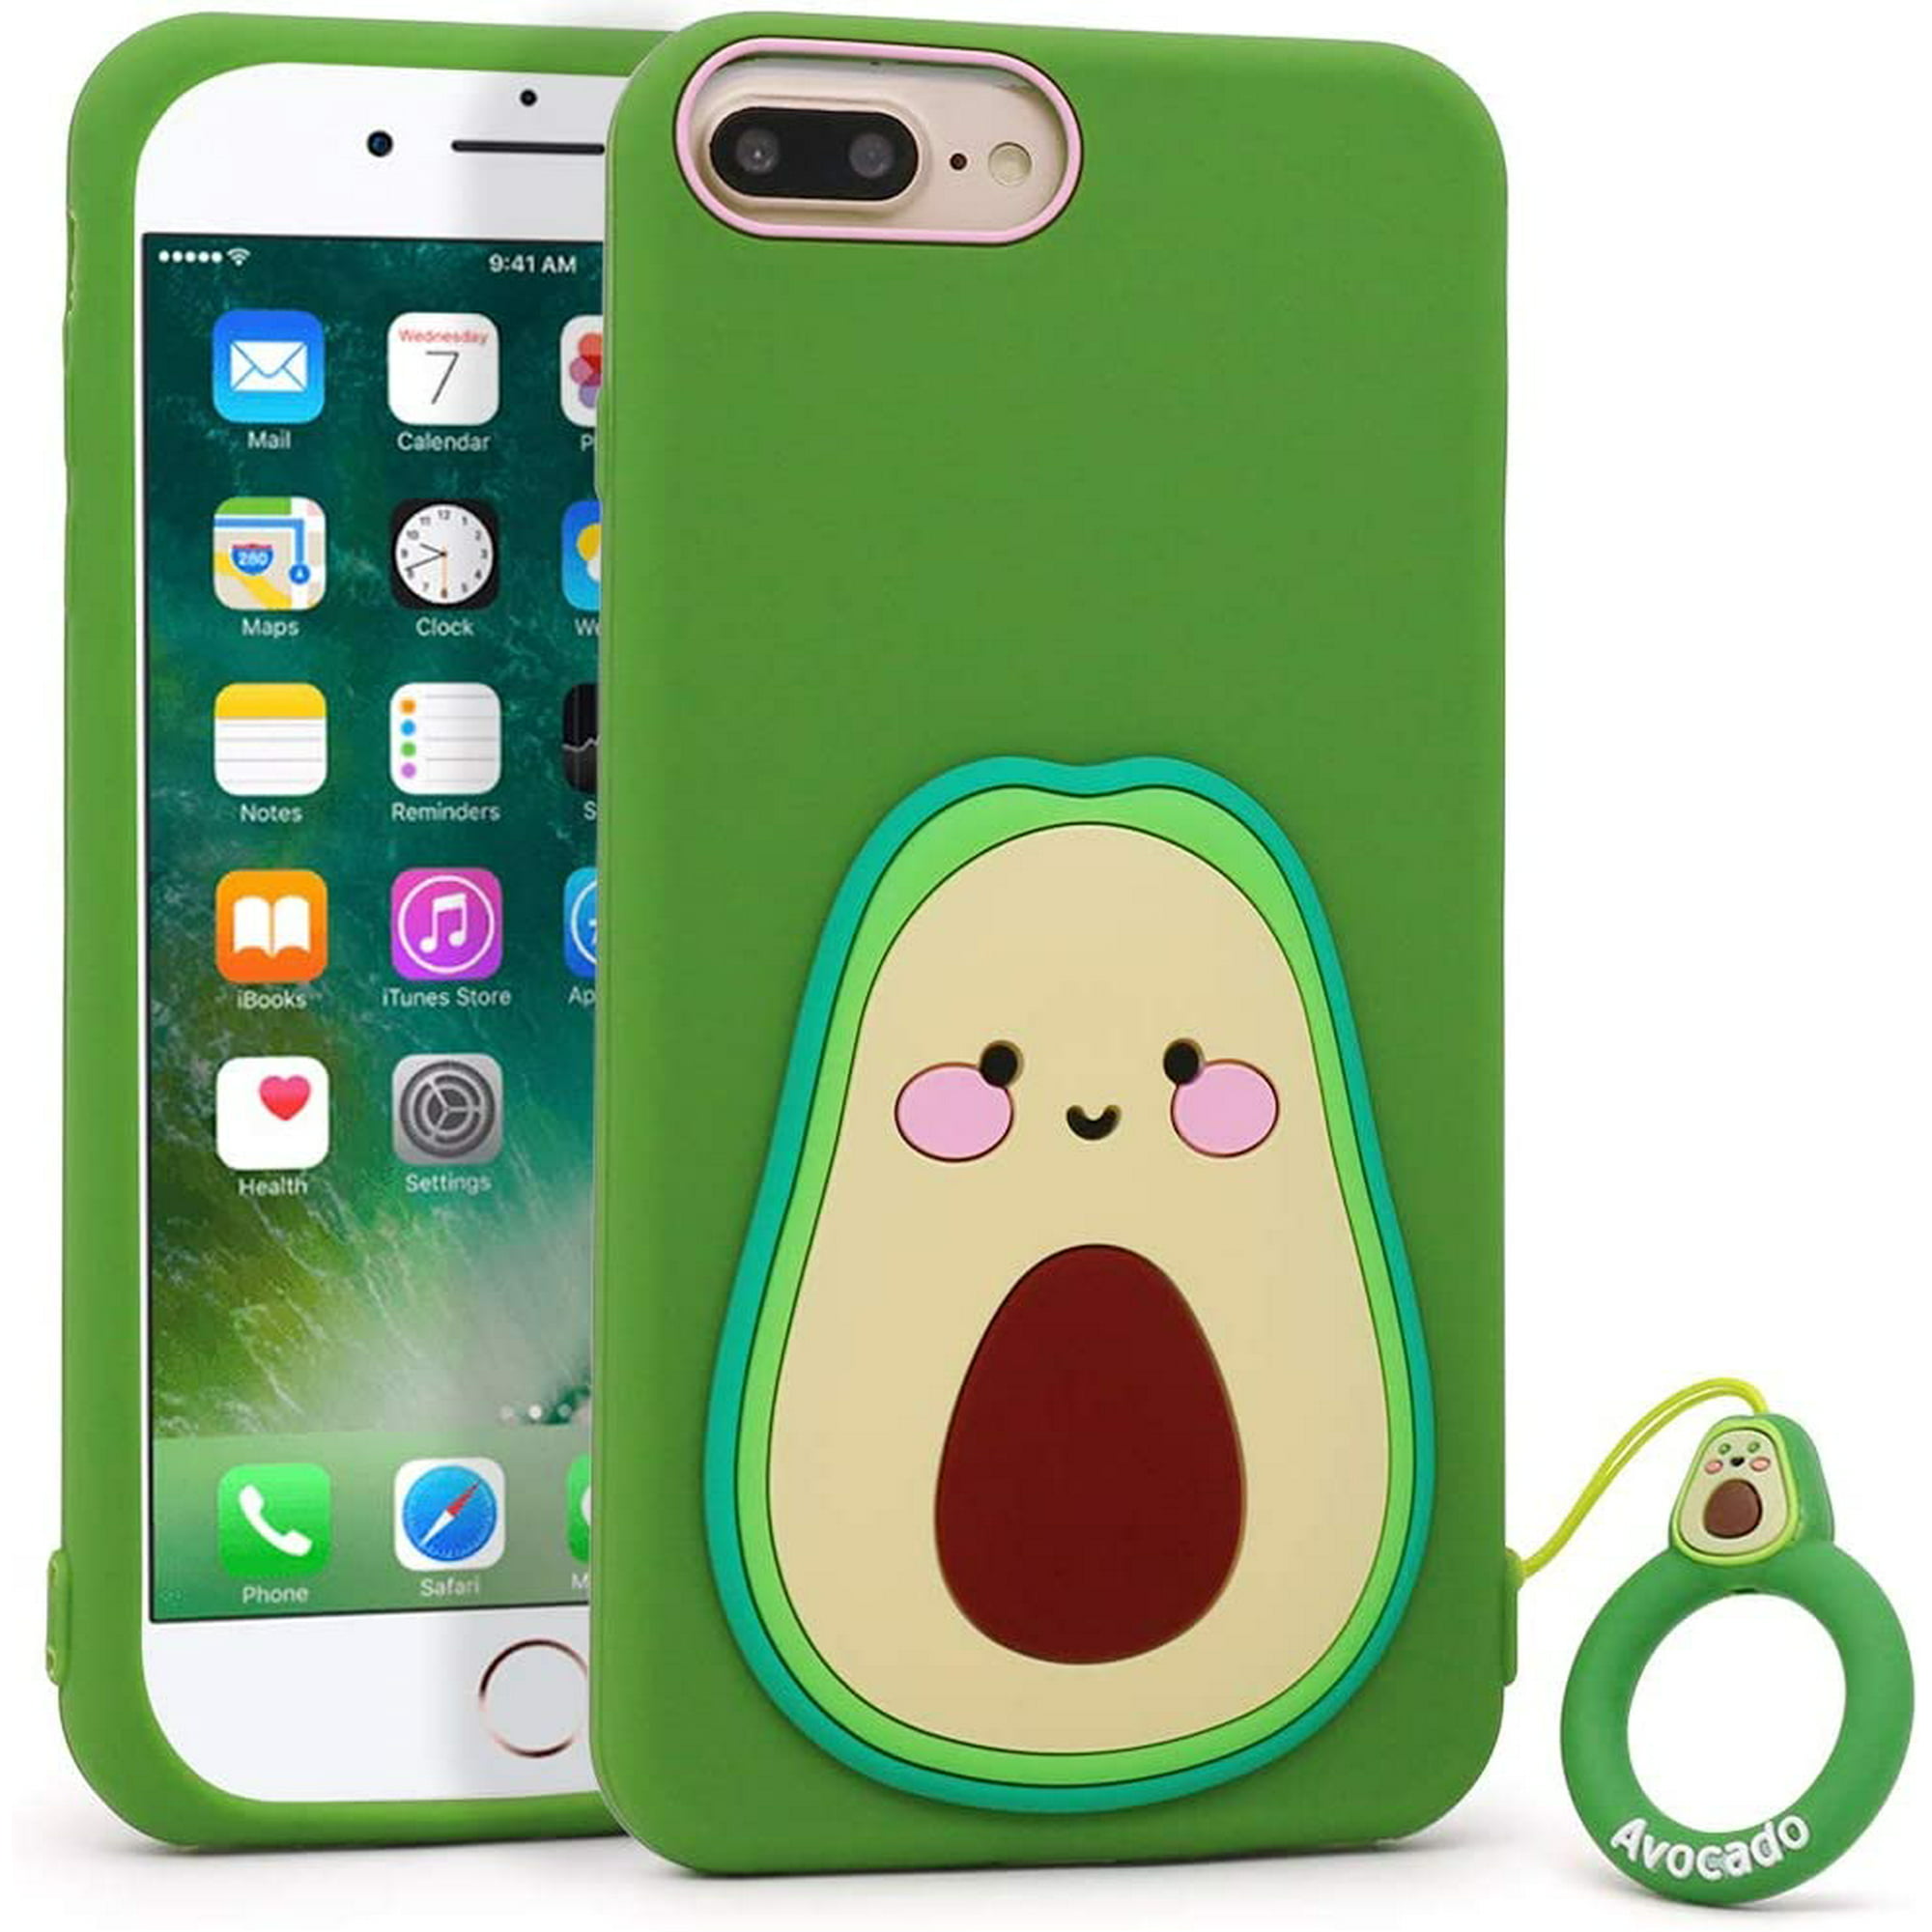 AIMTYD Cute iPhone 7 Plus Case, iPhone 8 Plus Case, Funny 3D Cartoon Fruit  Avocado Shaped Soft Silicone Shockproof Back Case Cover with Keychain for  iPhone 7 Plus/iPhone 8 Plus (